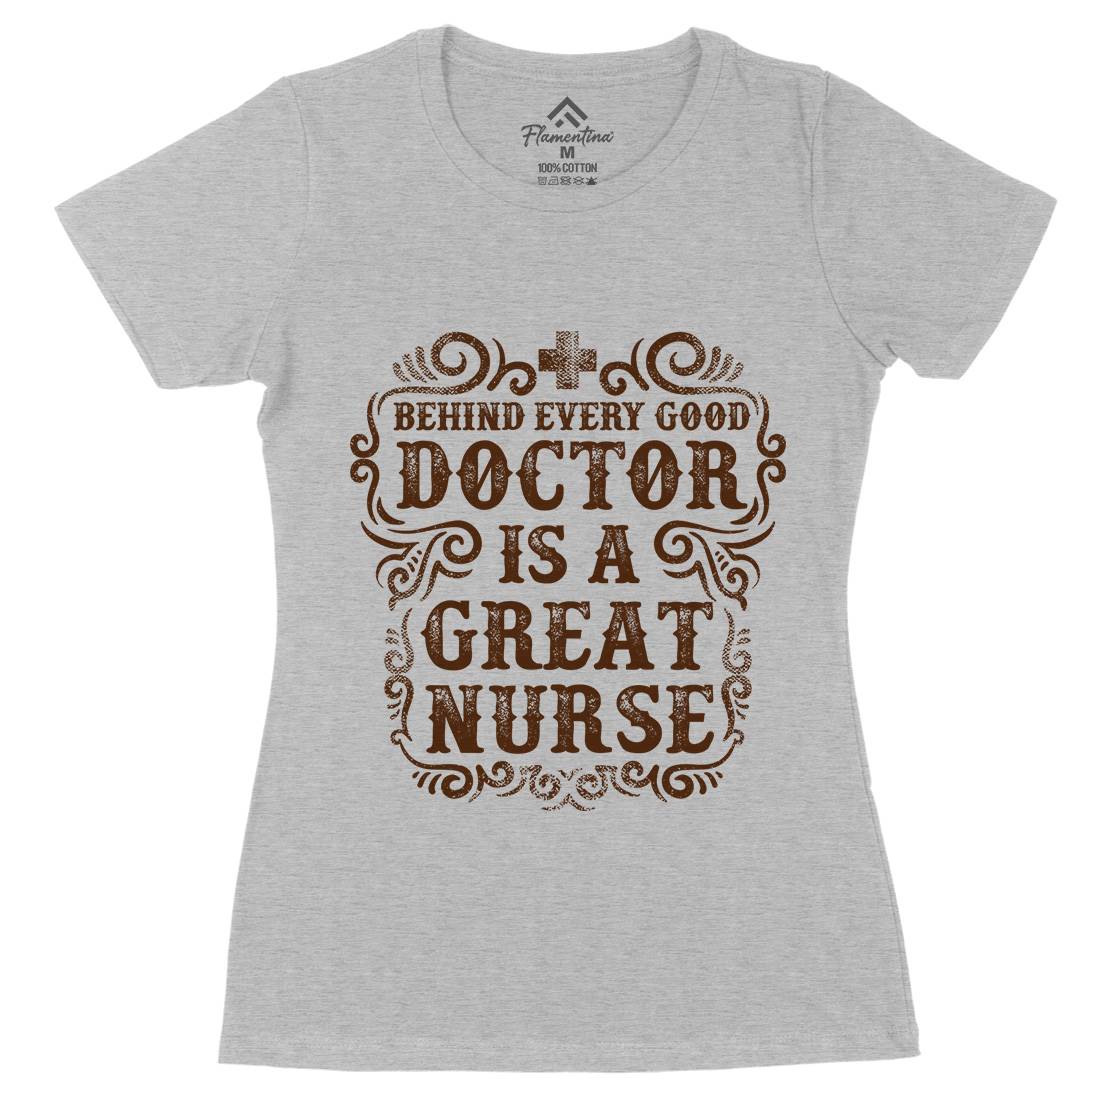 Behind Every Good Doctor Is A Great Nurse Womens Organic Crew Neck T-Shirt Work C910